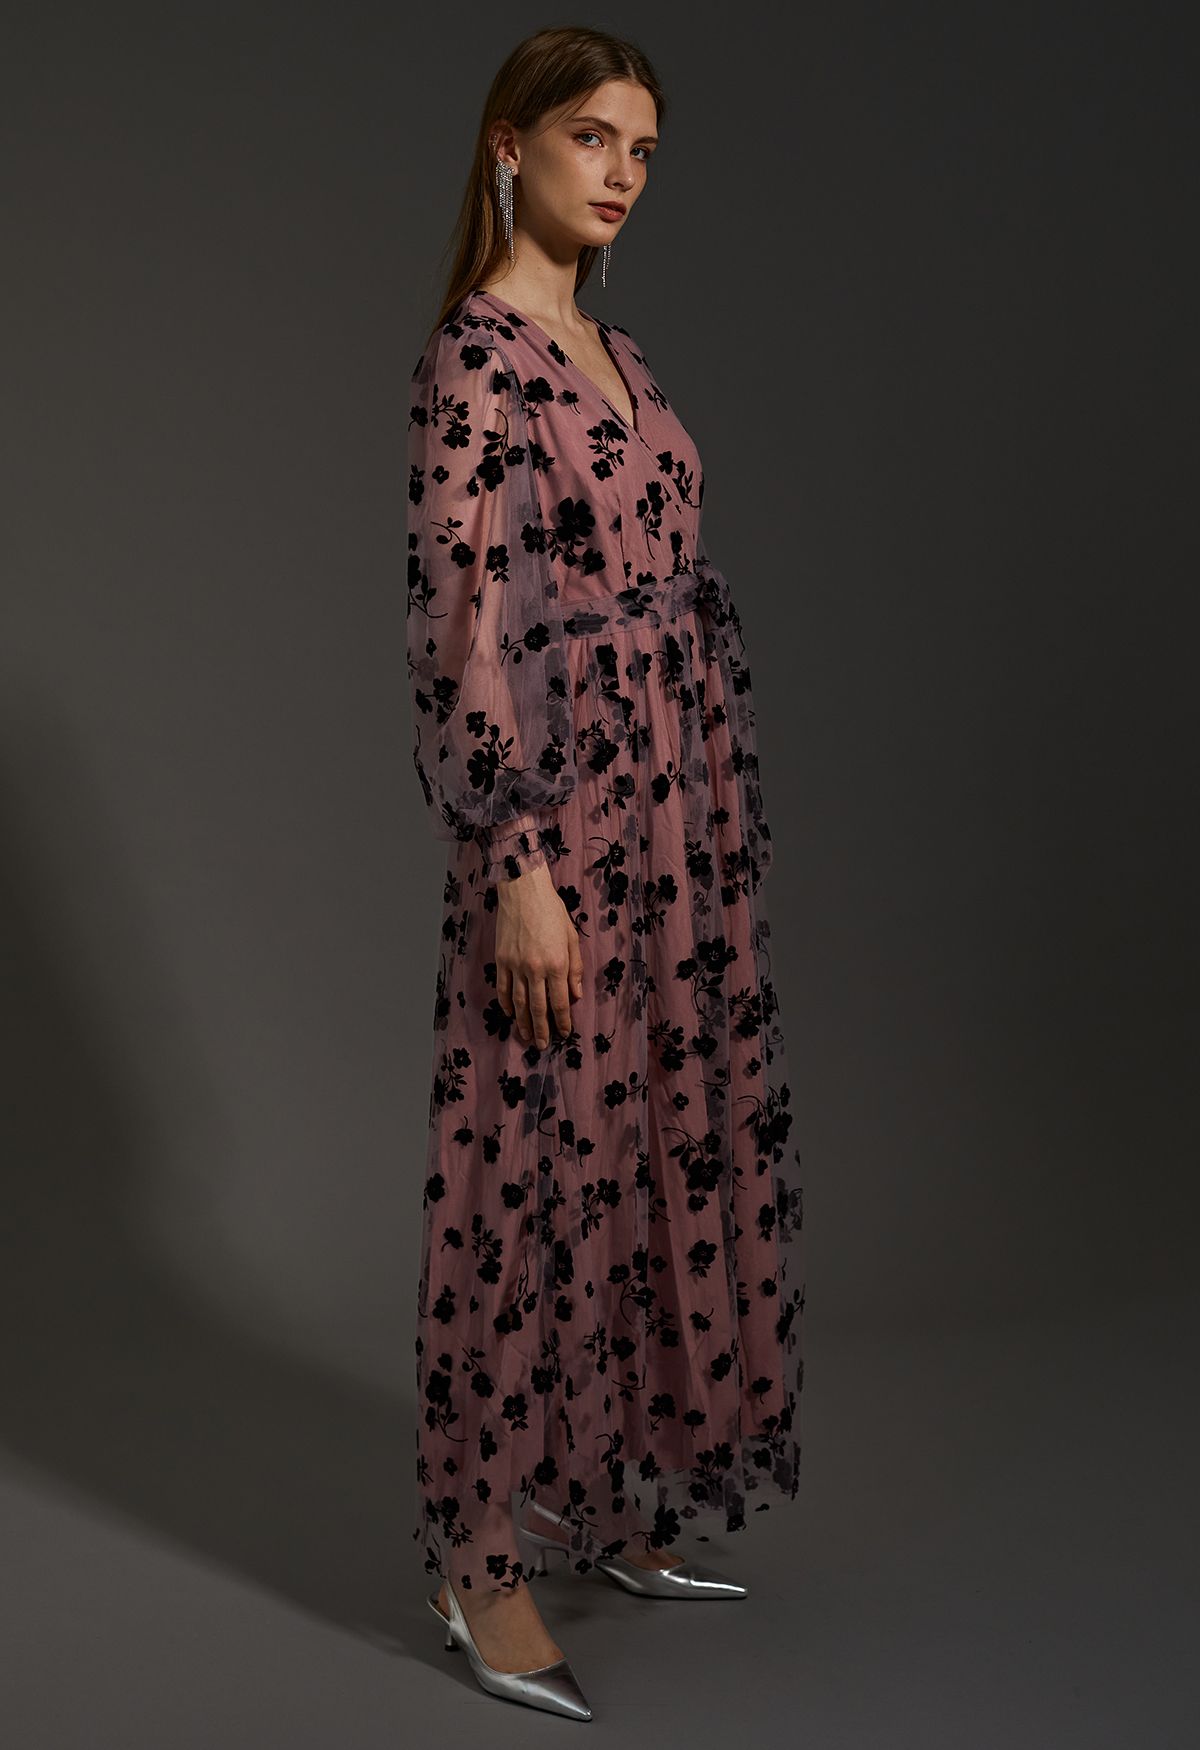 3D Posy Mesh Wrap Maxi Dress in Pink - Retro, Indie and Unique Fashion